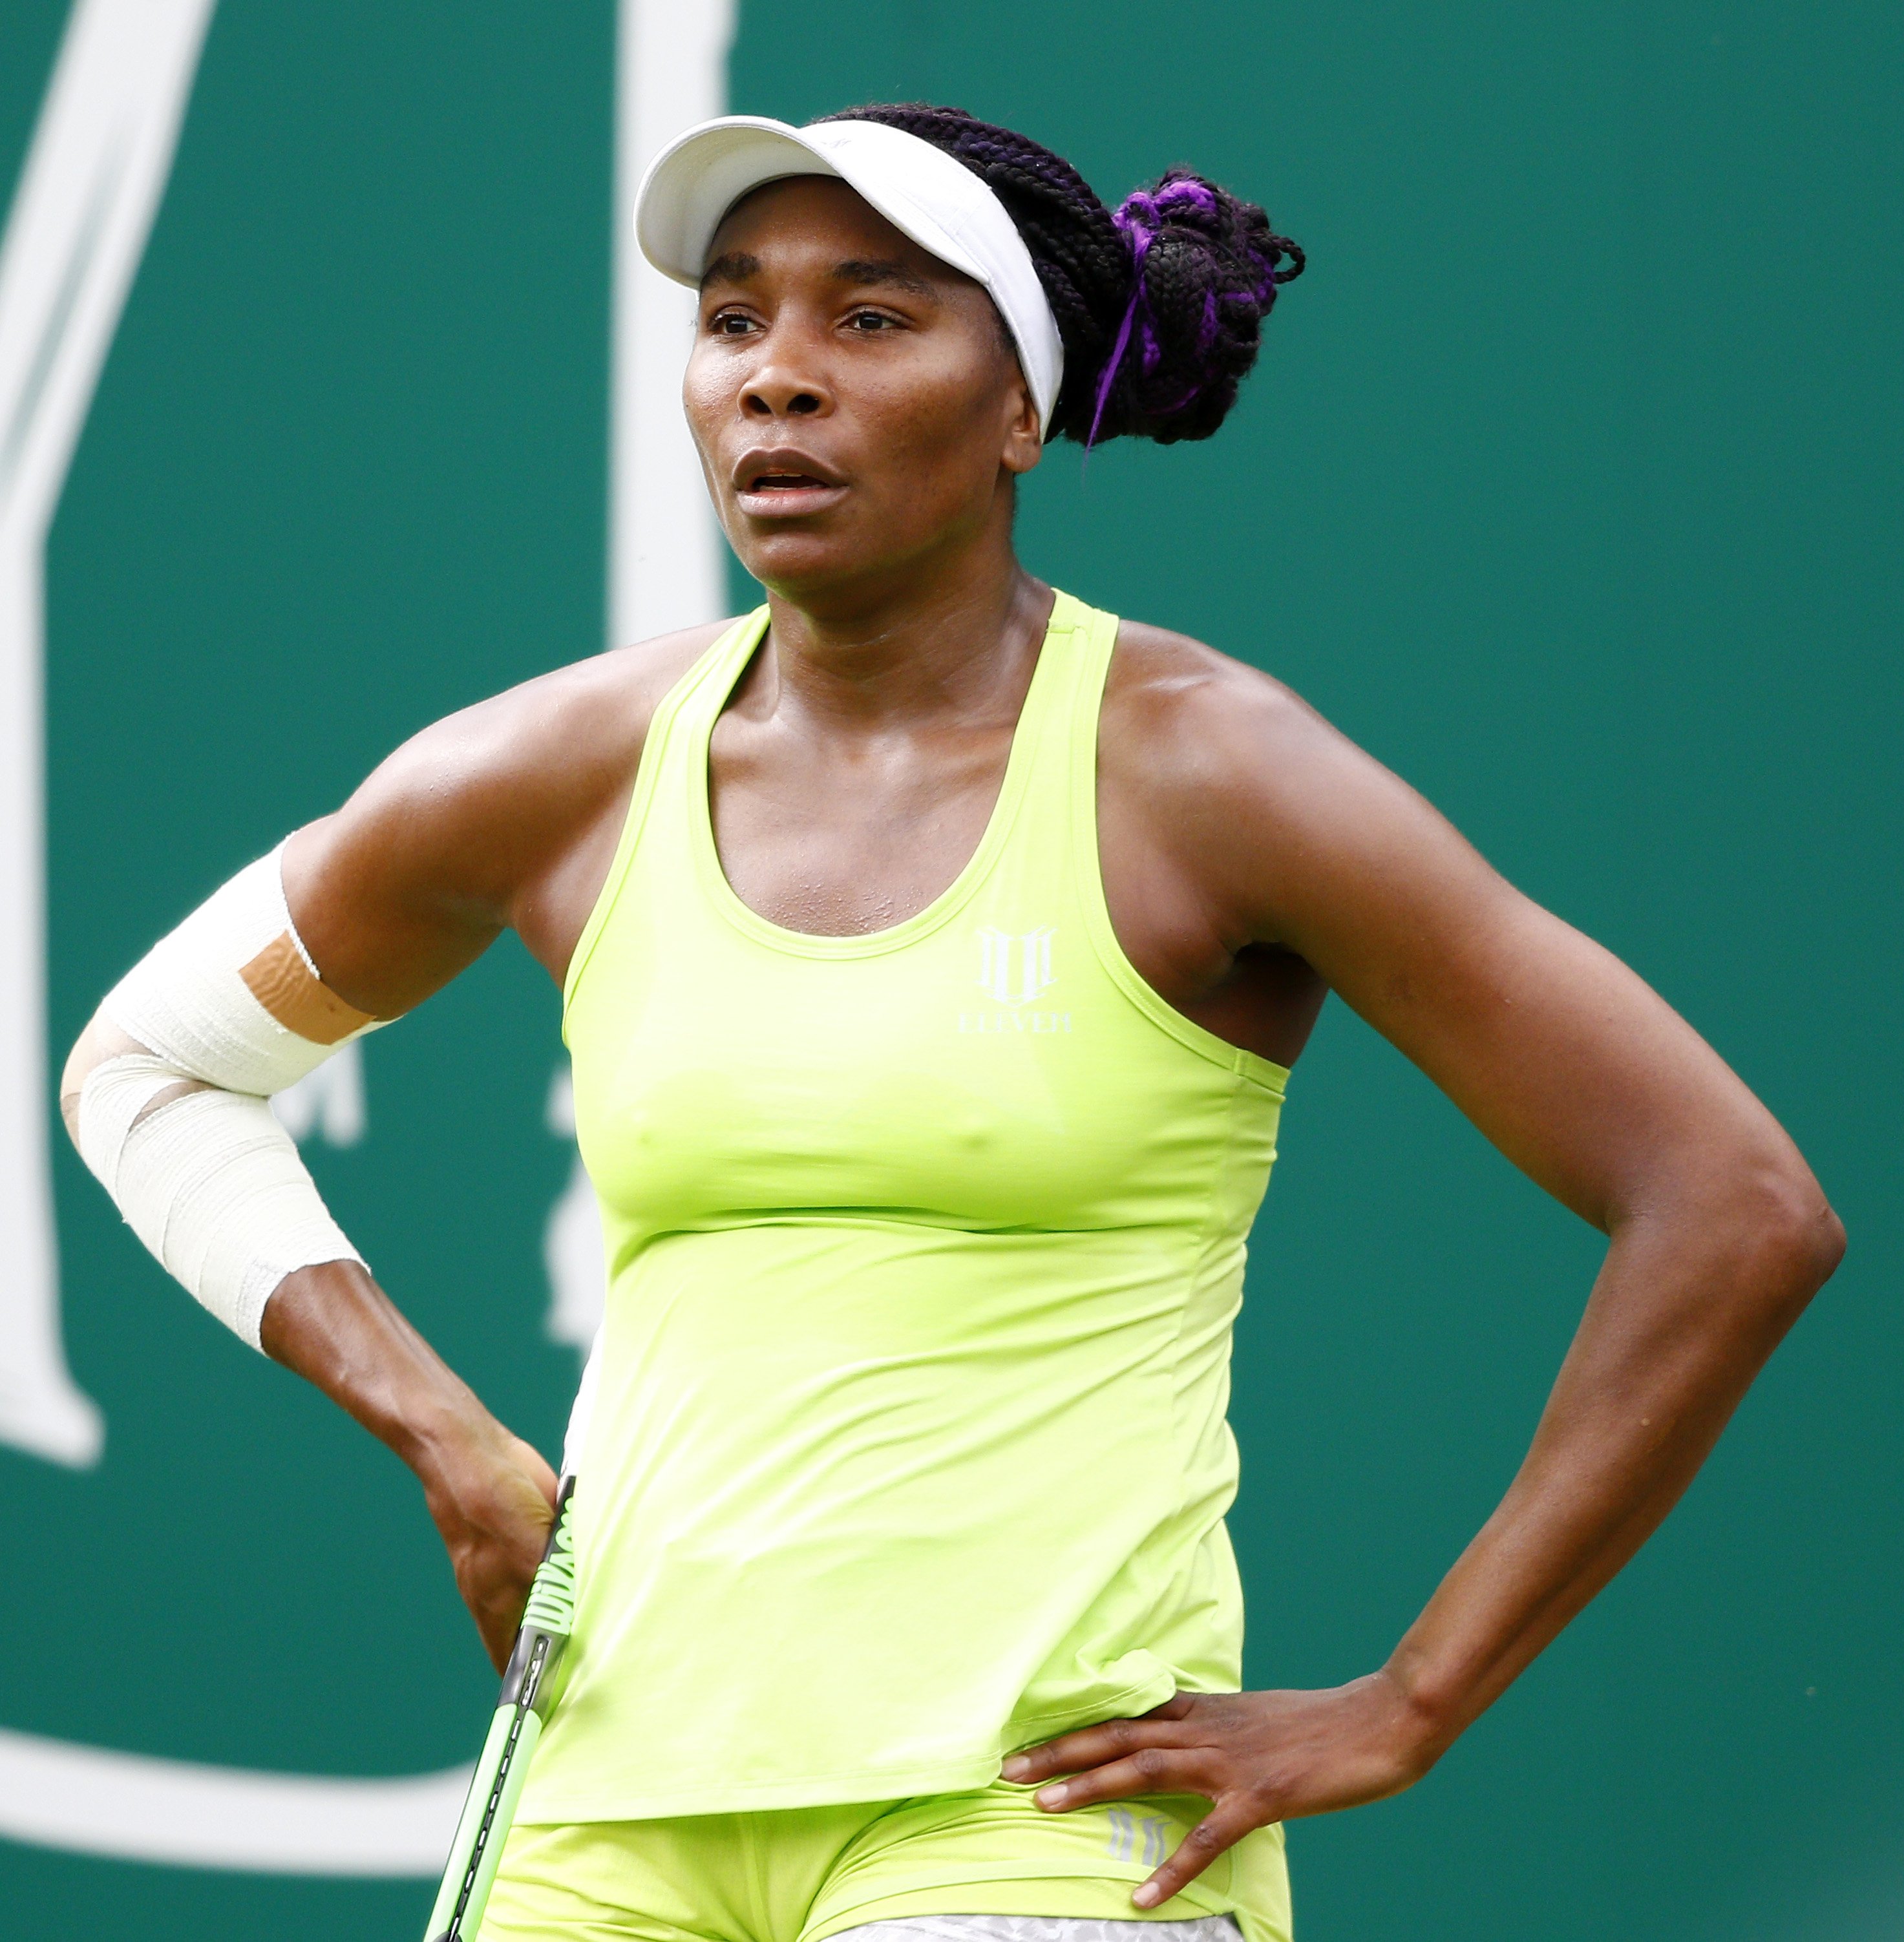 Venus Williams at the Nature Valley Classic in Birmingham, United Kingdom on June 21, 2019. | Photo: Getty Images